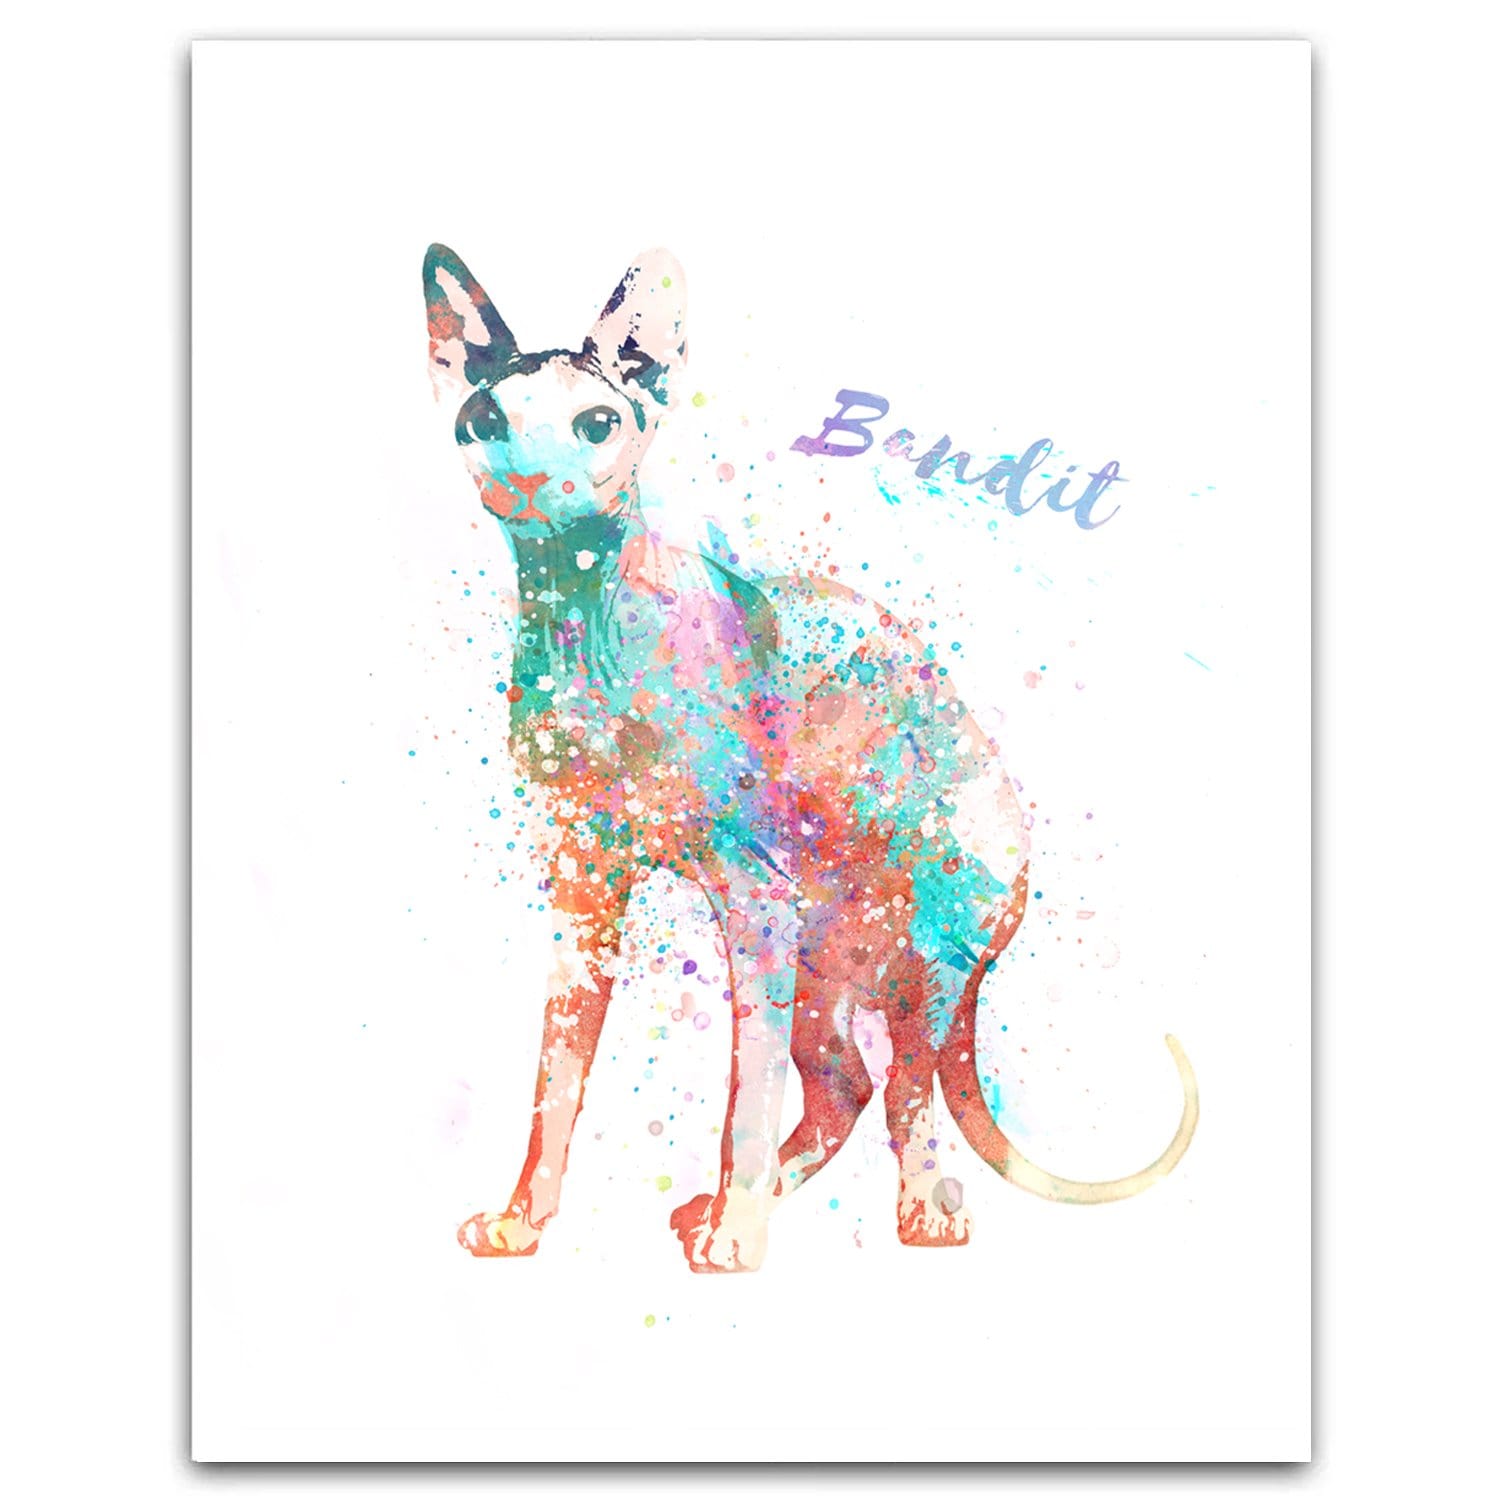 Watercolor pet portrait of a Sphynx Cat - Personalized Cat Gifts from Personal-Prints